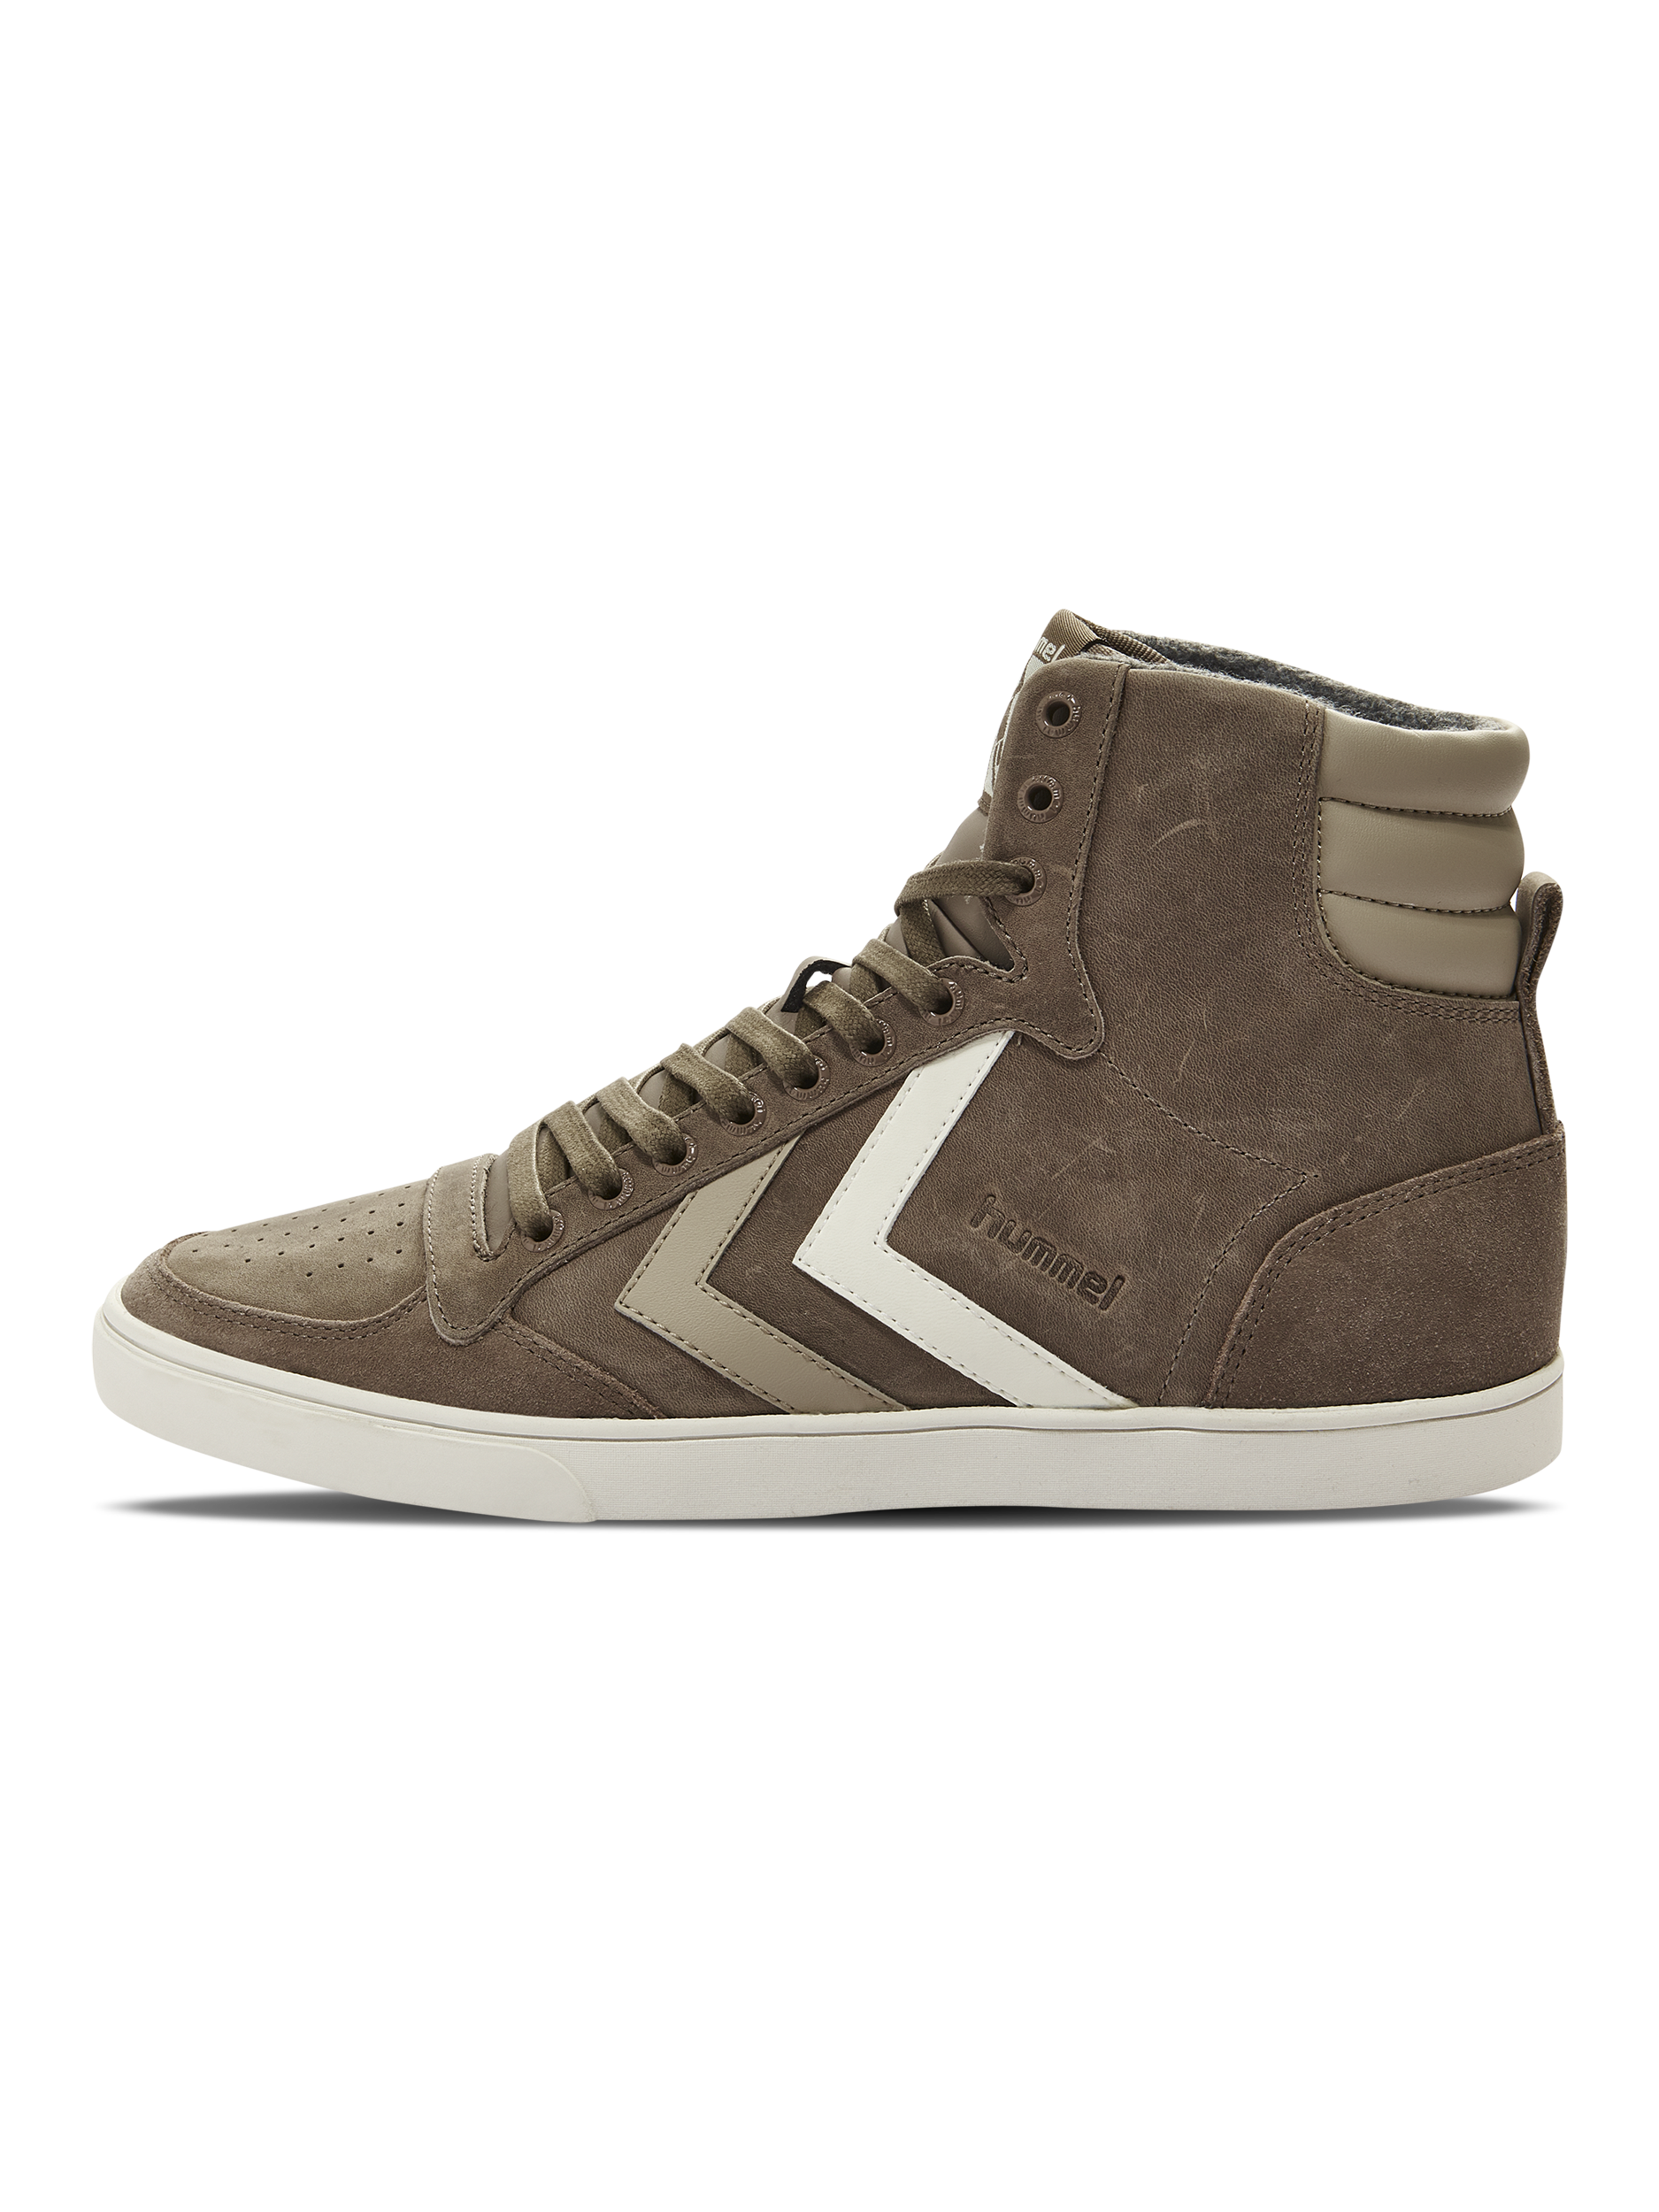 hummel SLIMMER STADIL DUO HIGH - TAUPE GREY |